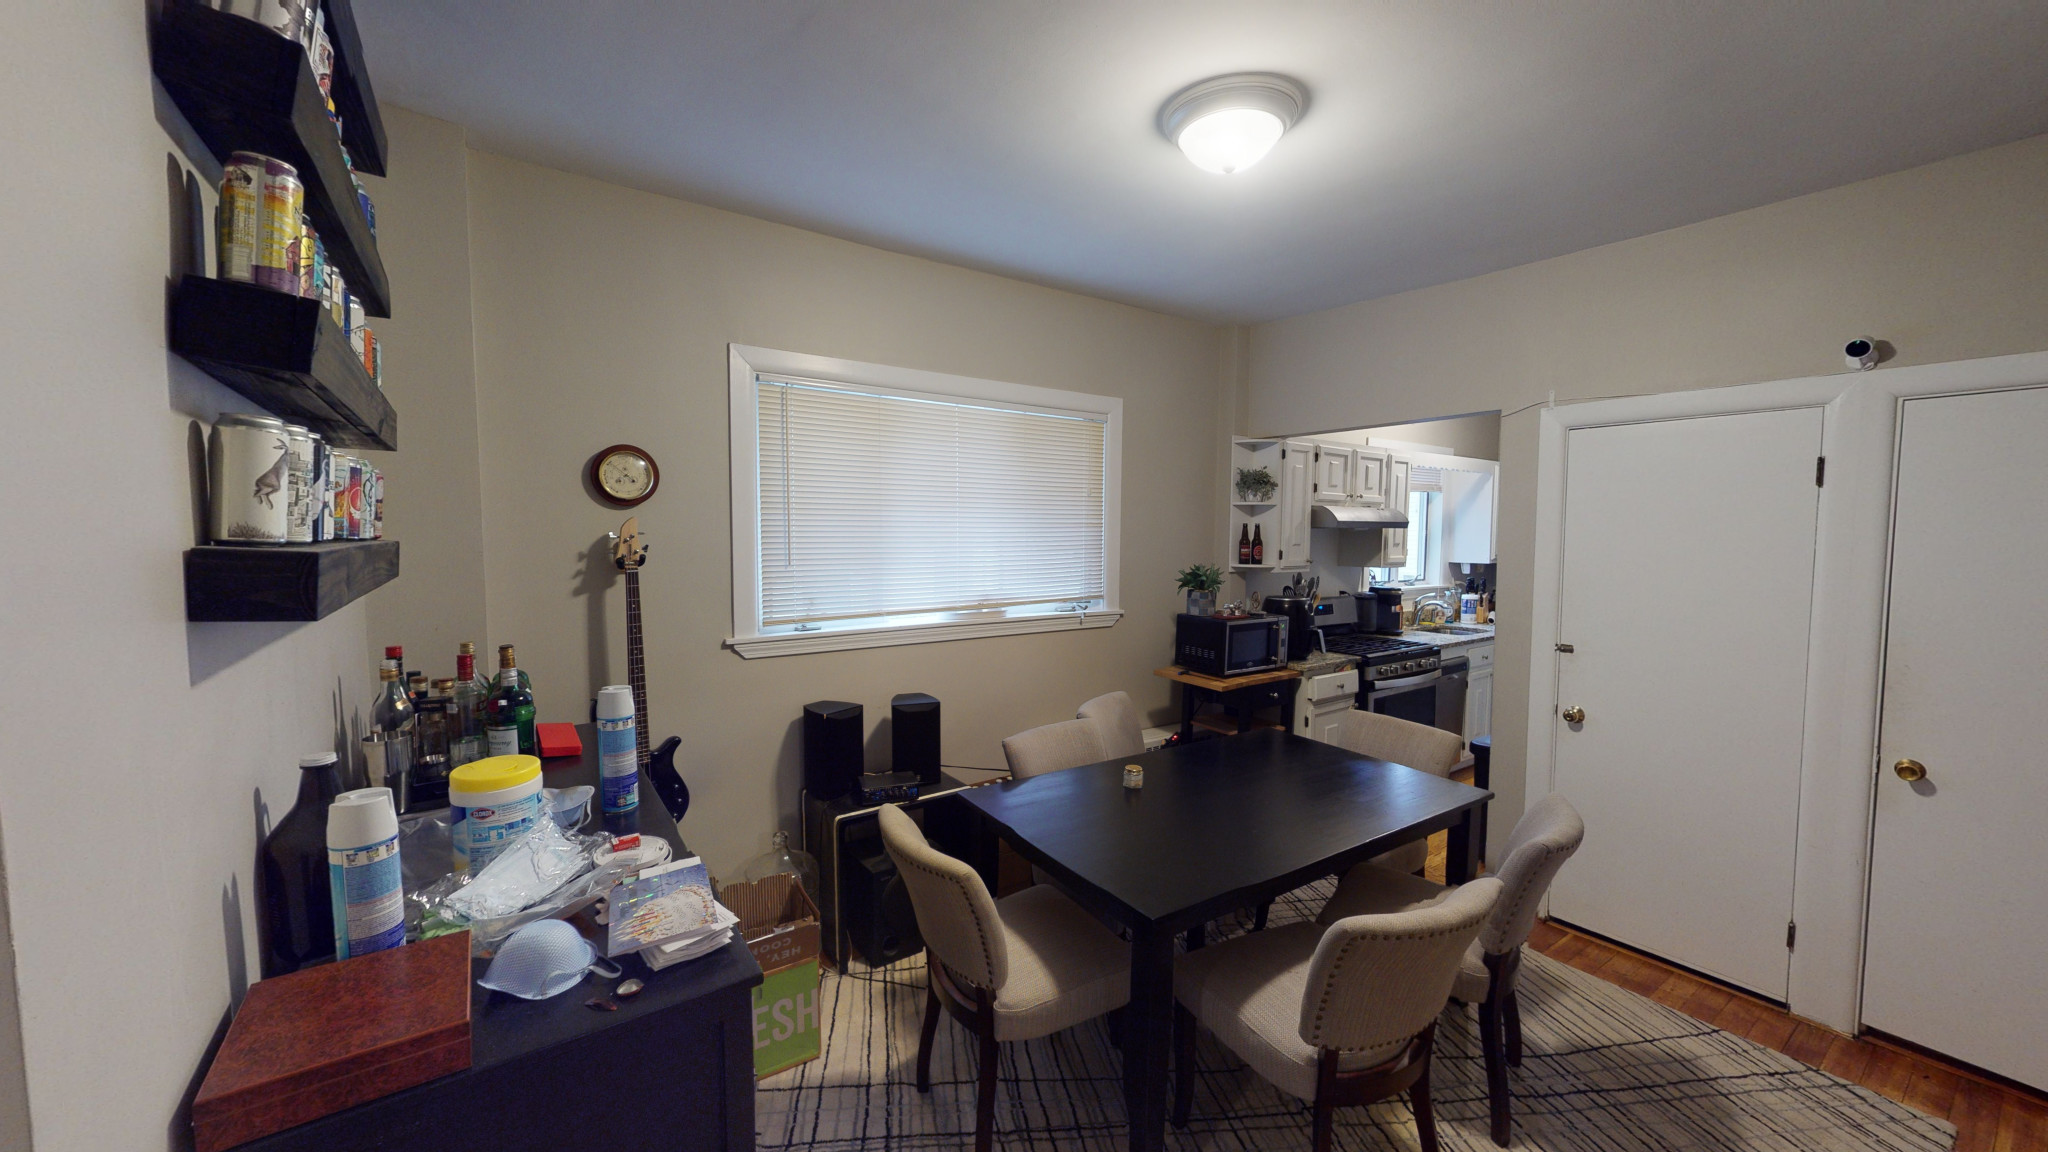 Photos of apartment on Rogers Ave.,Somerville MA 02144